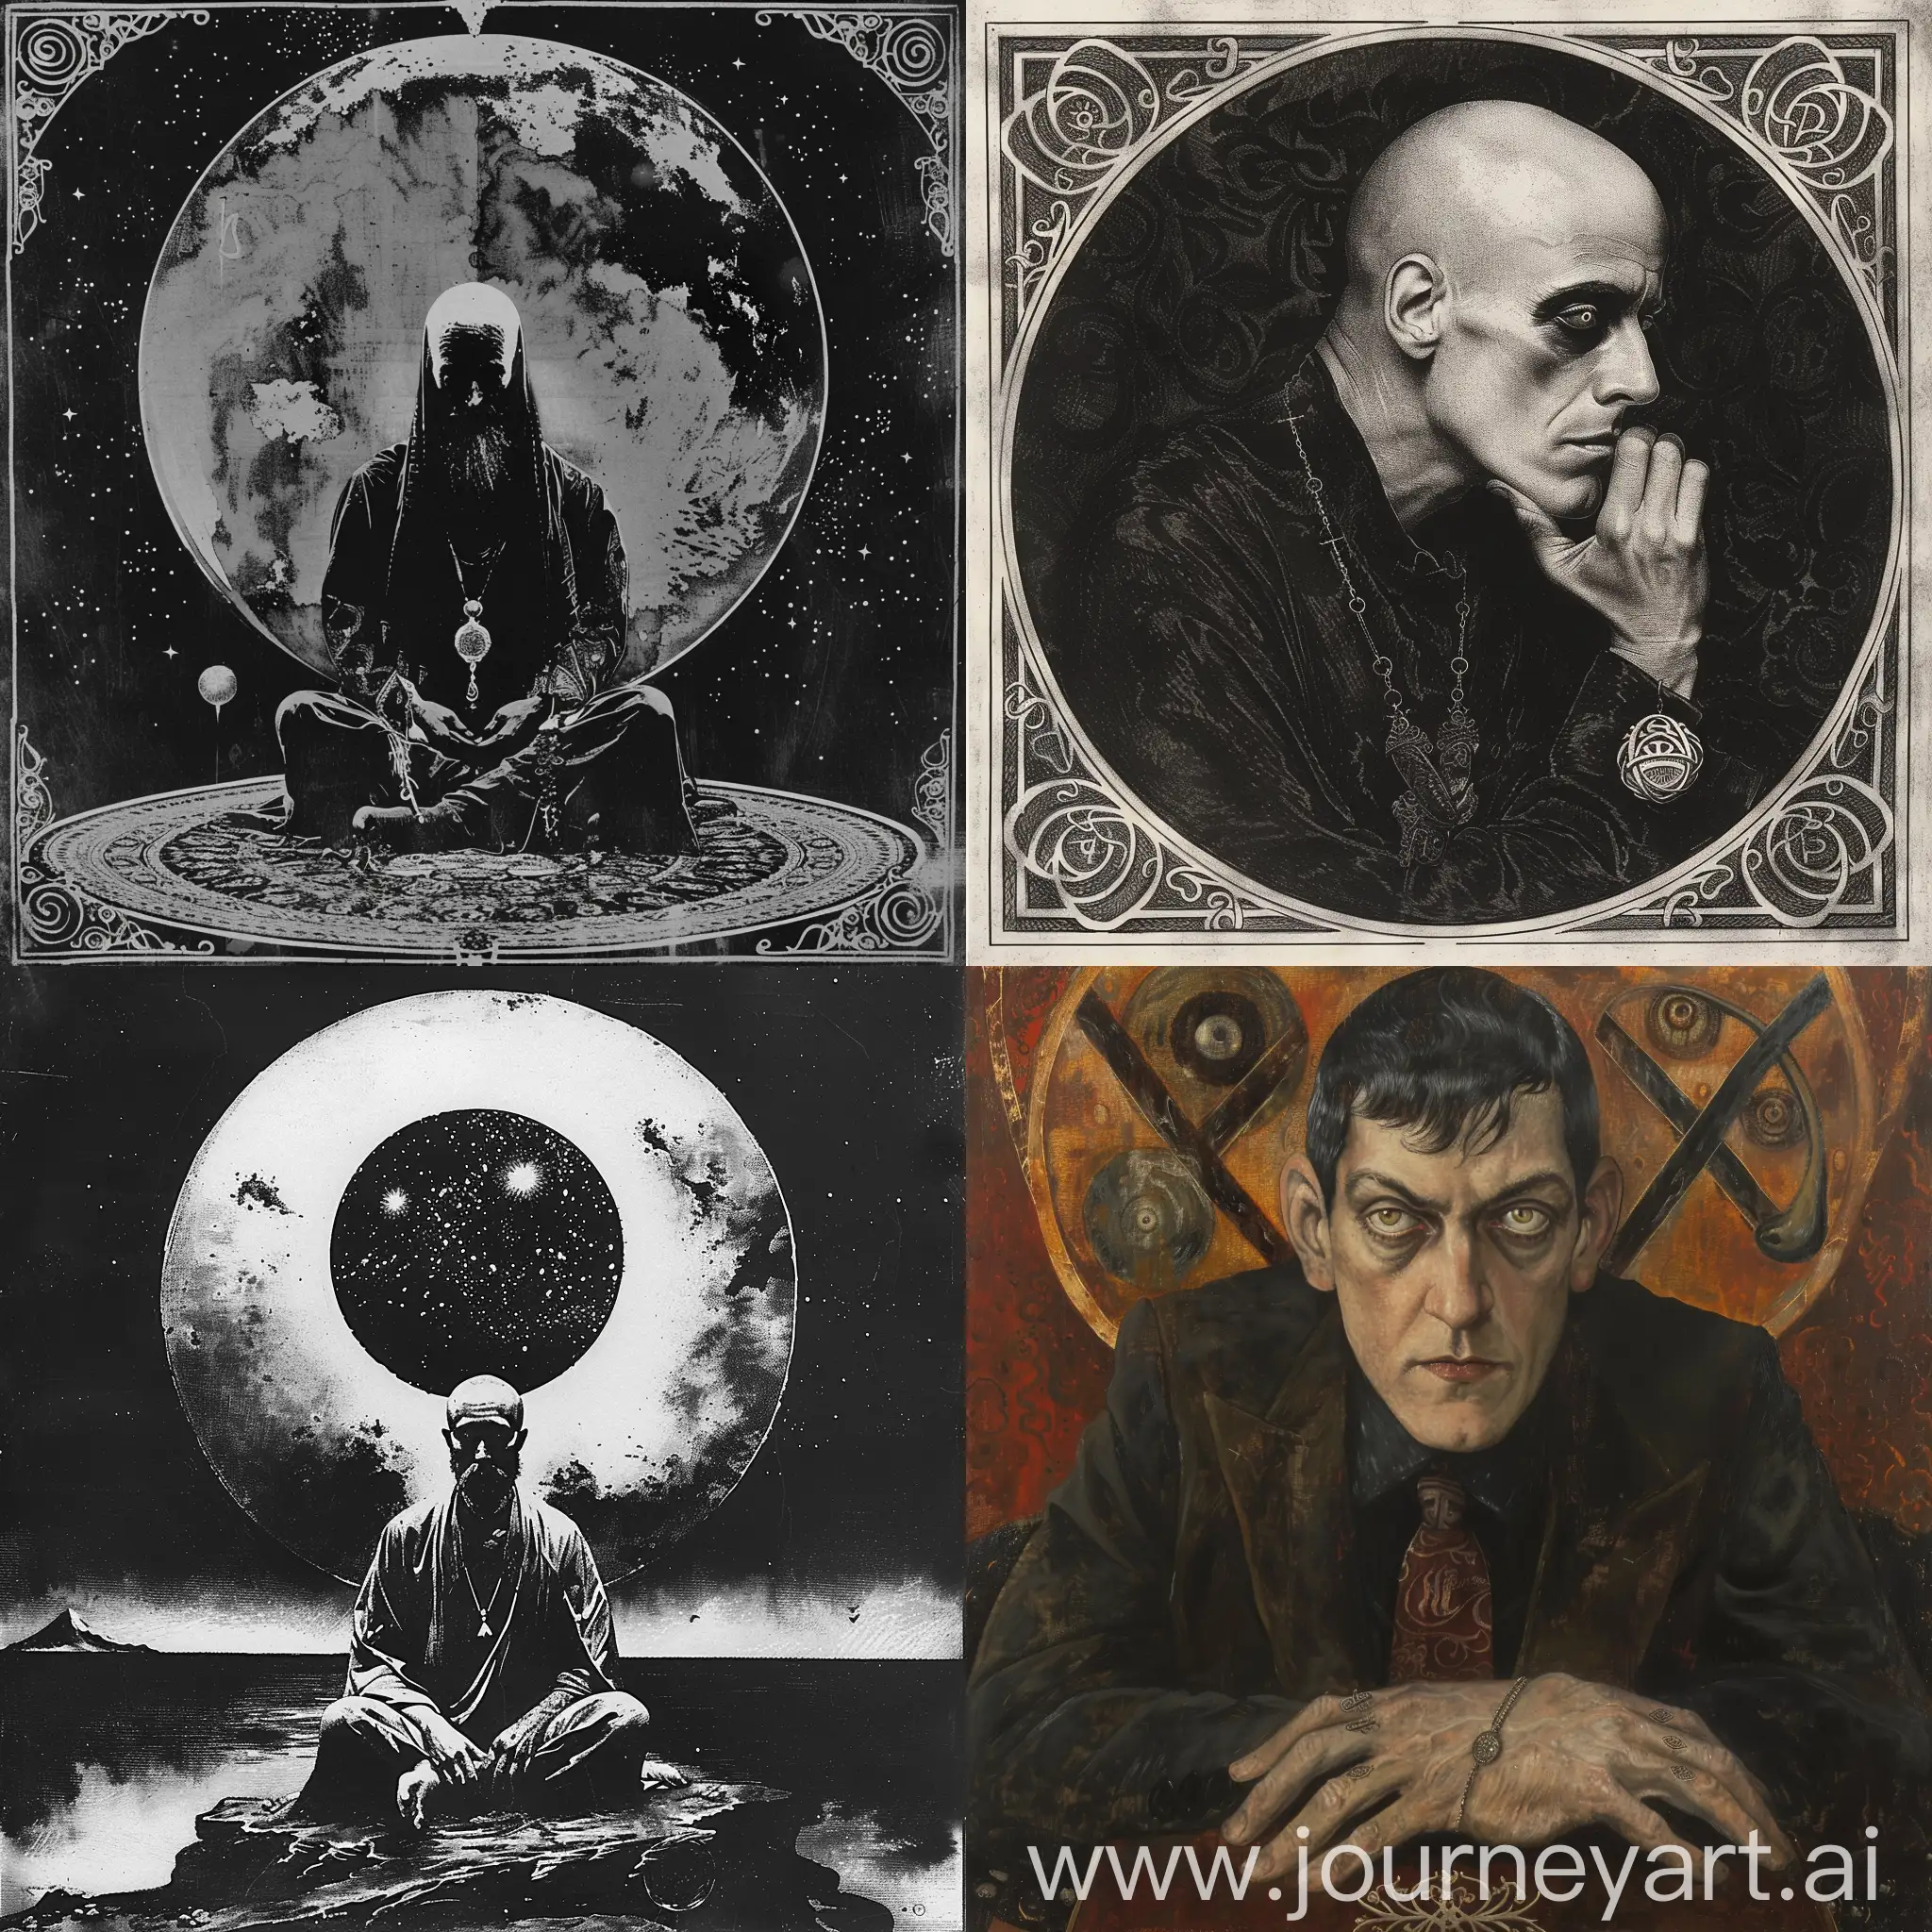 Aleister Crowley was an English occultist, philosopher, ceremonial magician, poet, painter, novelist and mountaineer. 